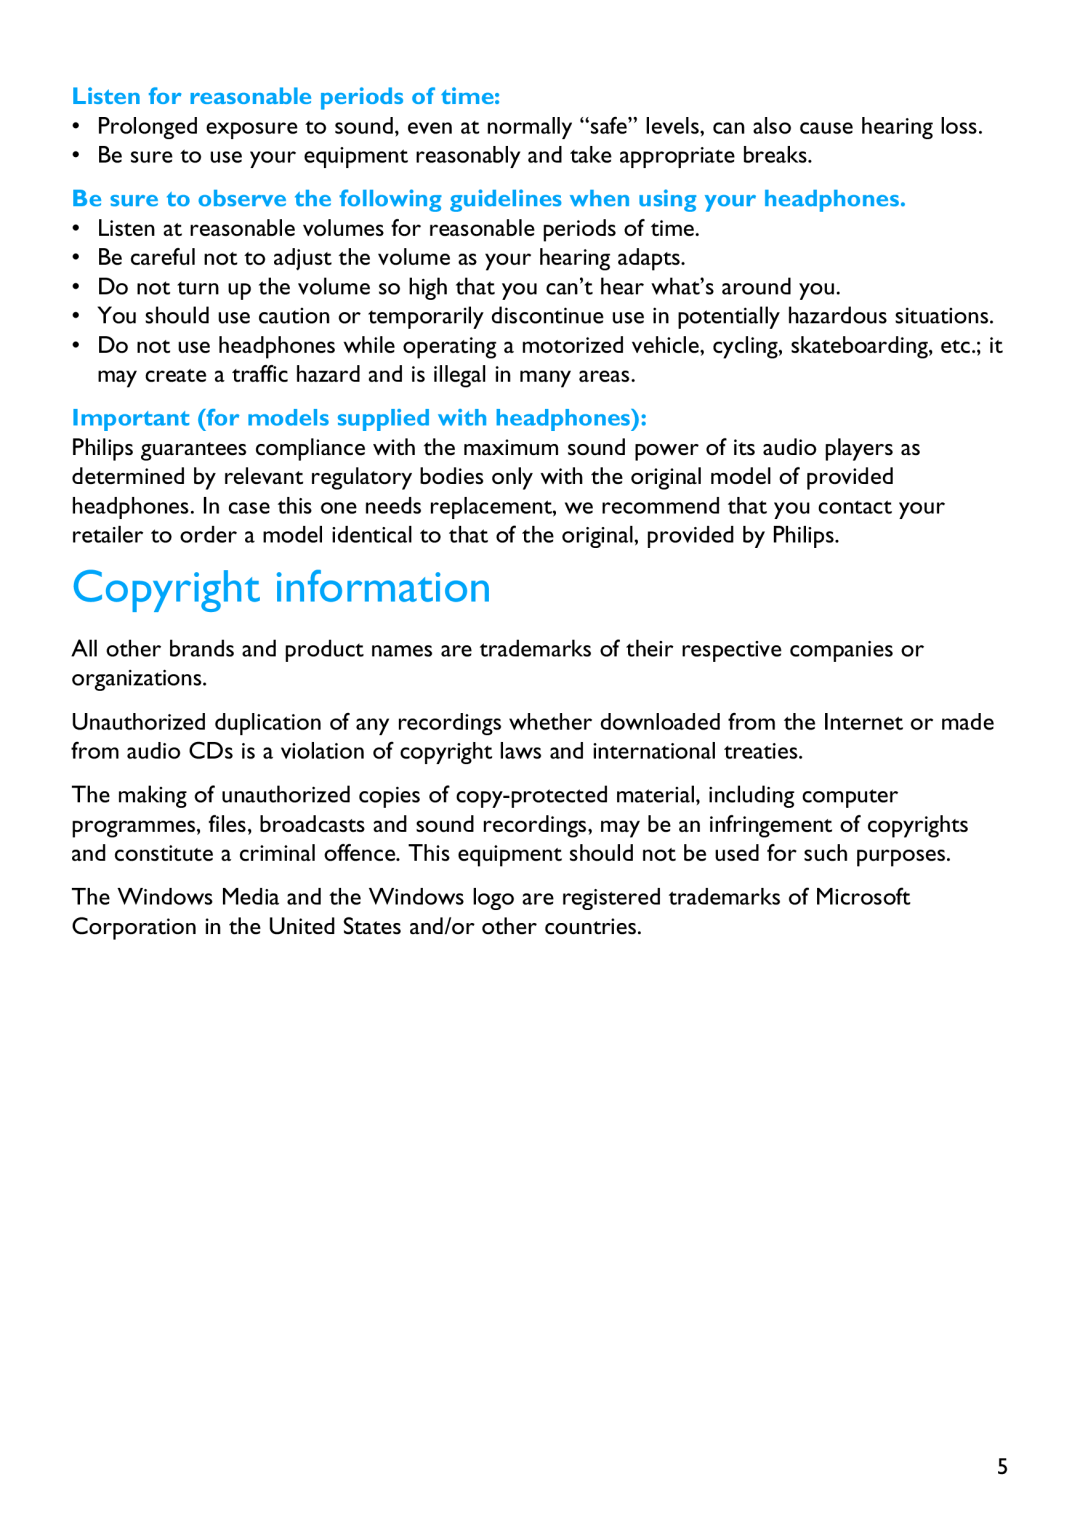 Philips SA2100 Copyright information, Listen for reasonable periods of time, Important for models supplied with headphones 